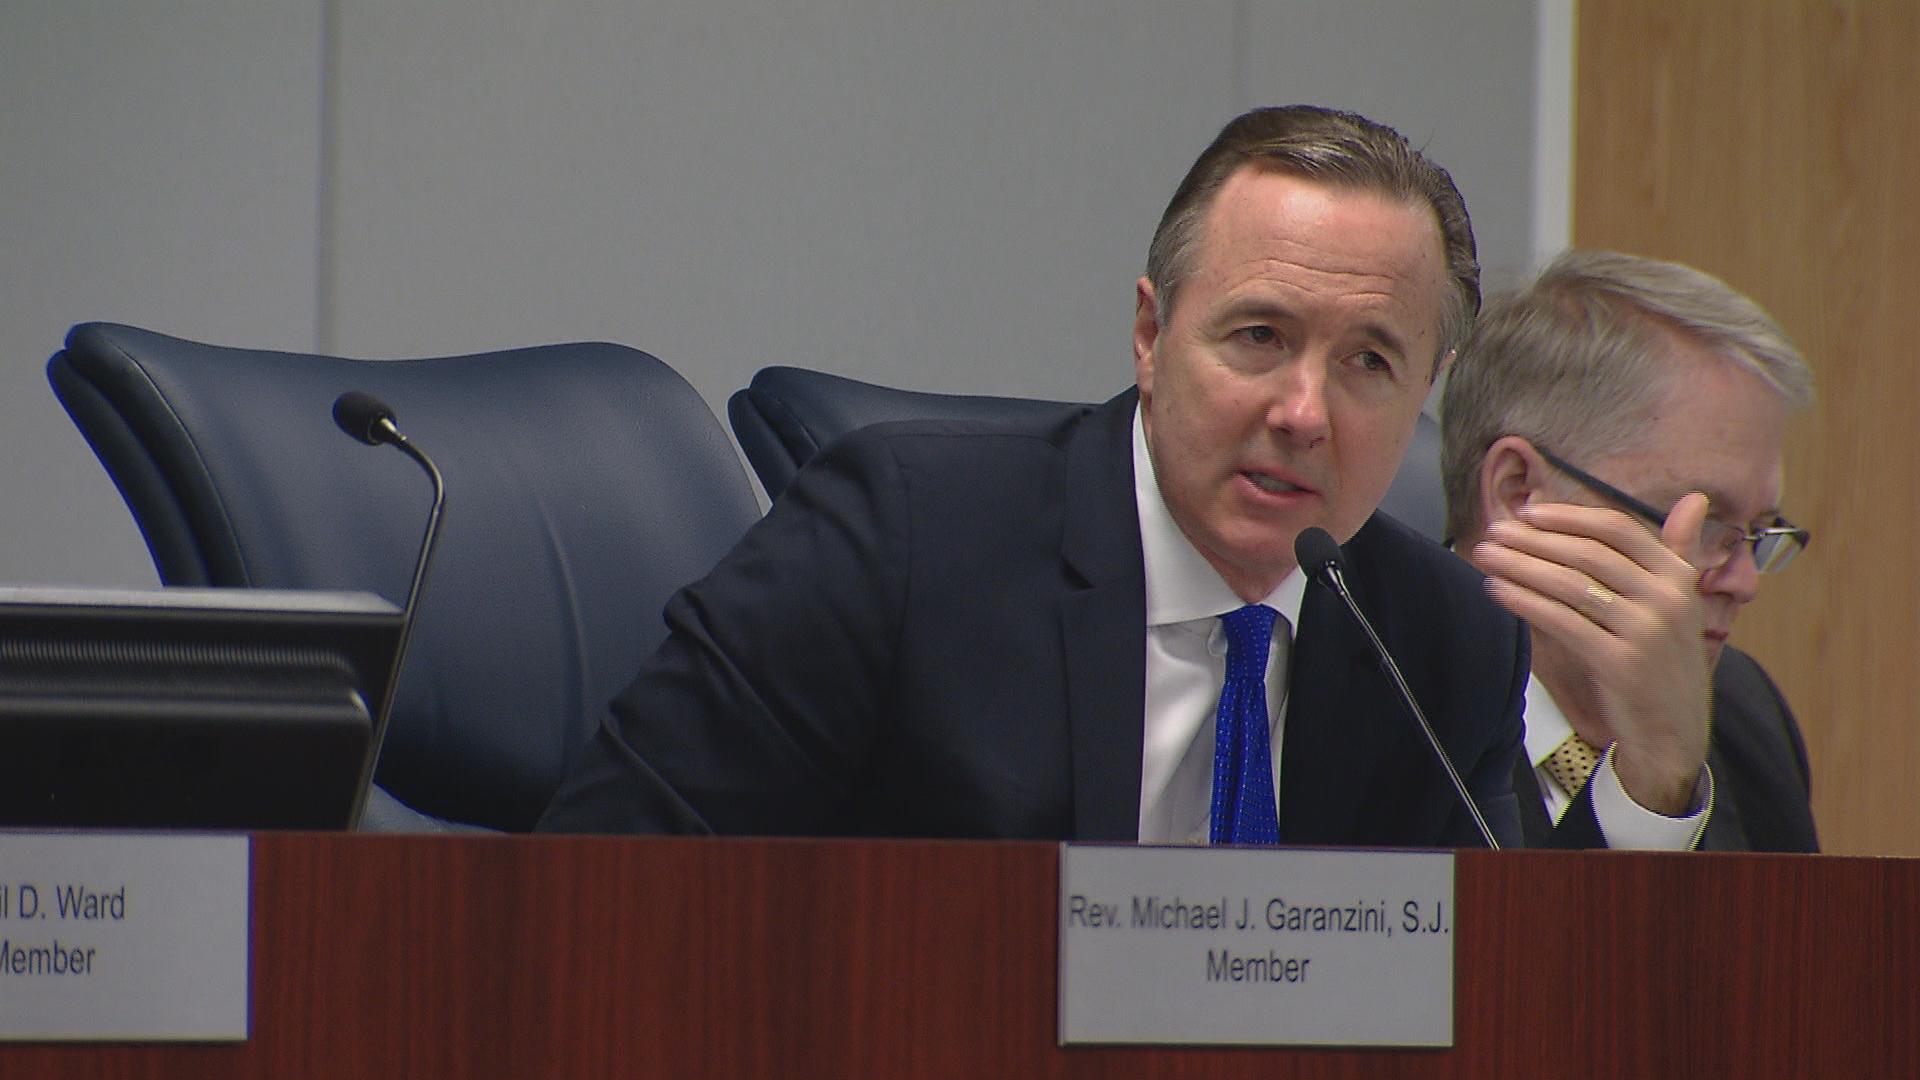 CPS CEO Forrest Claypool speaks in Dec 2016 at a Chicago Board of Education meeting. During Wednesday’s meeting, he offered no new details on the district’s plan for the end of the school year. (Chicago Tonight)